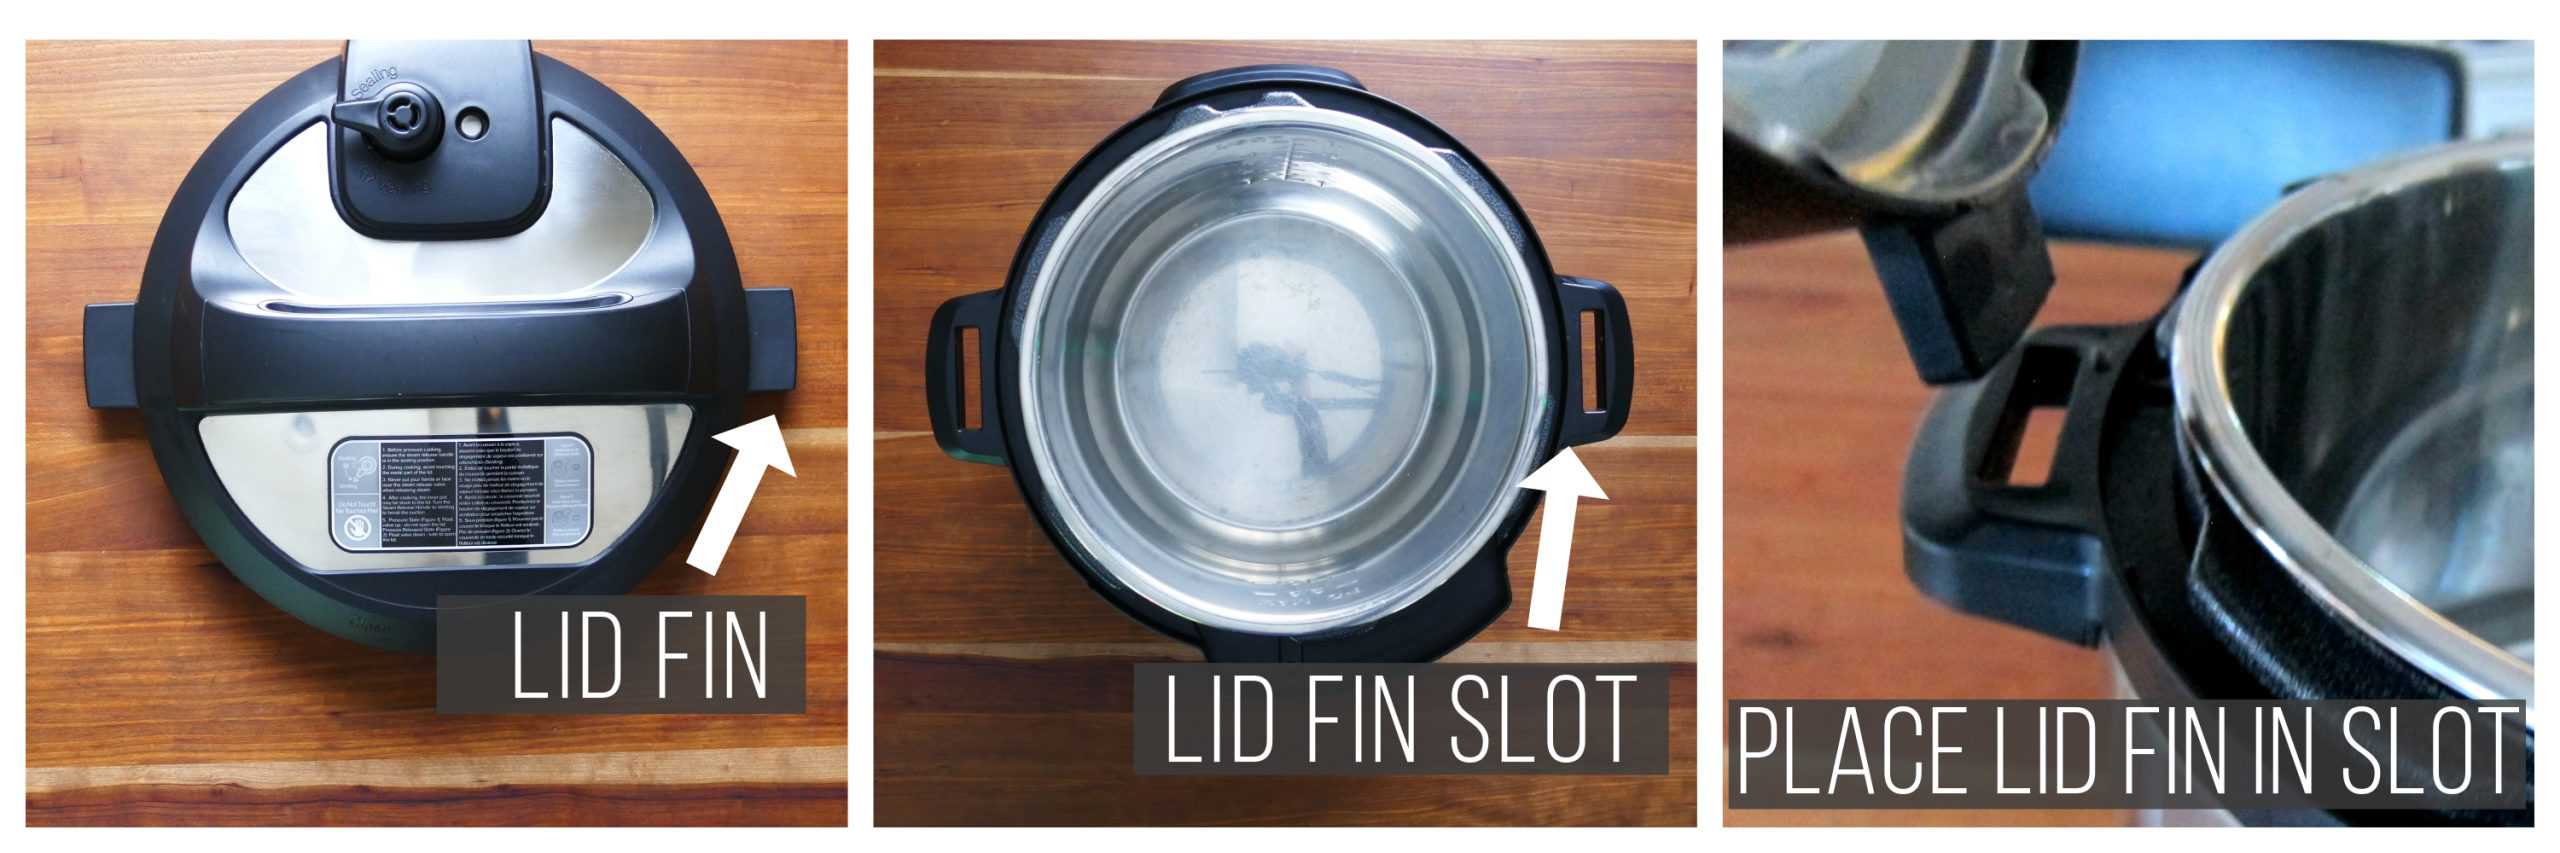 Prop Instant Pot lid open collage - arrow showing fin, arrow showing slot, fin being placed in slot